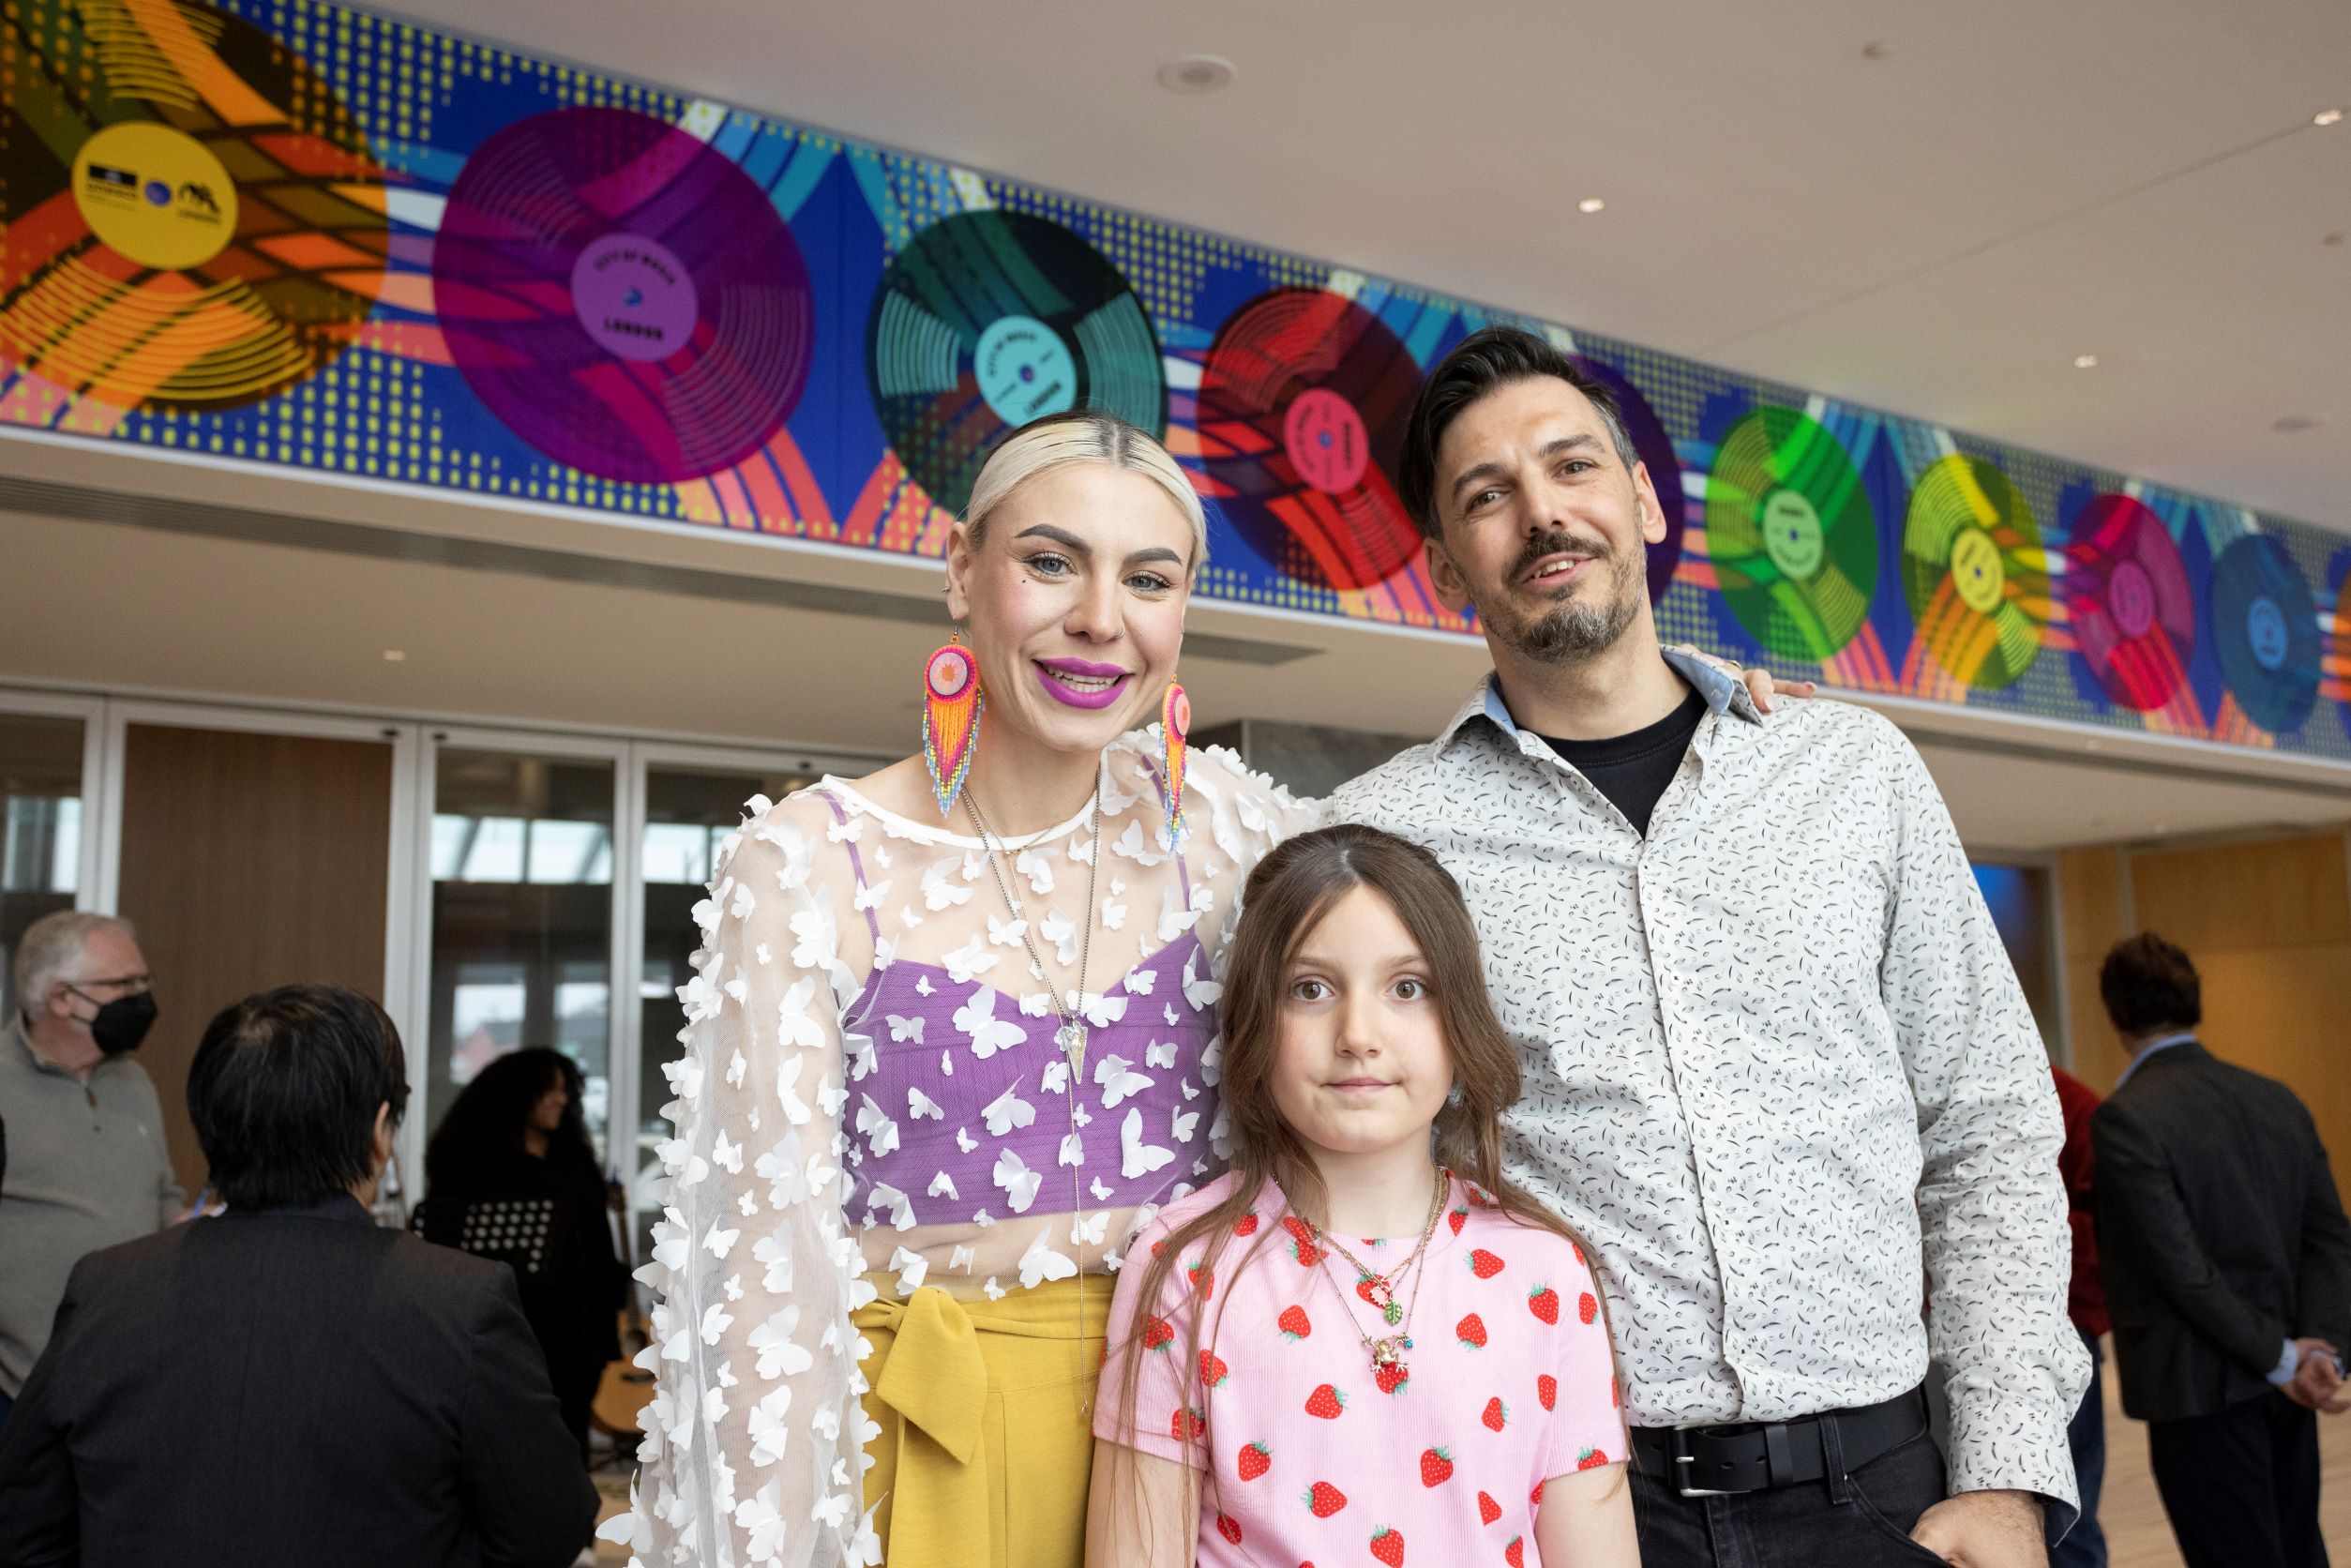 Caption: Local artist Tova Hasiwar and her family pose for a picture in front of the London UNESCO City of Music Mural